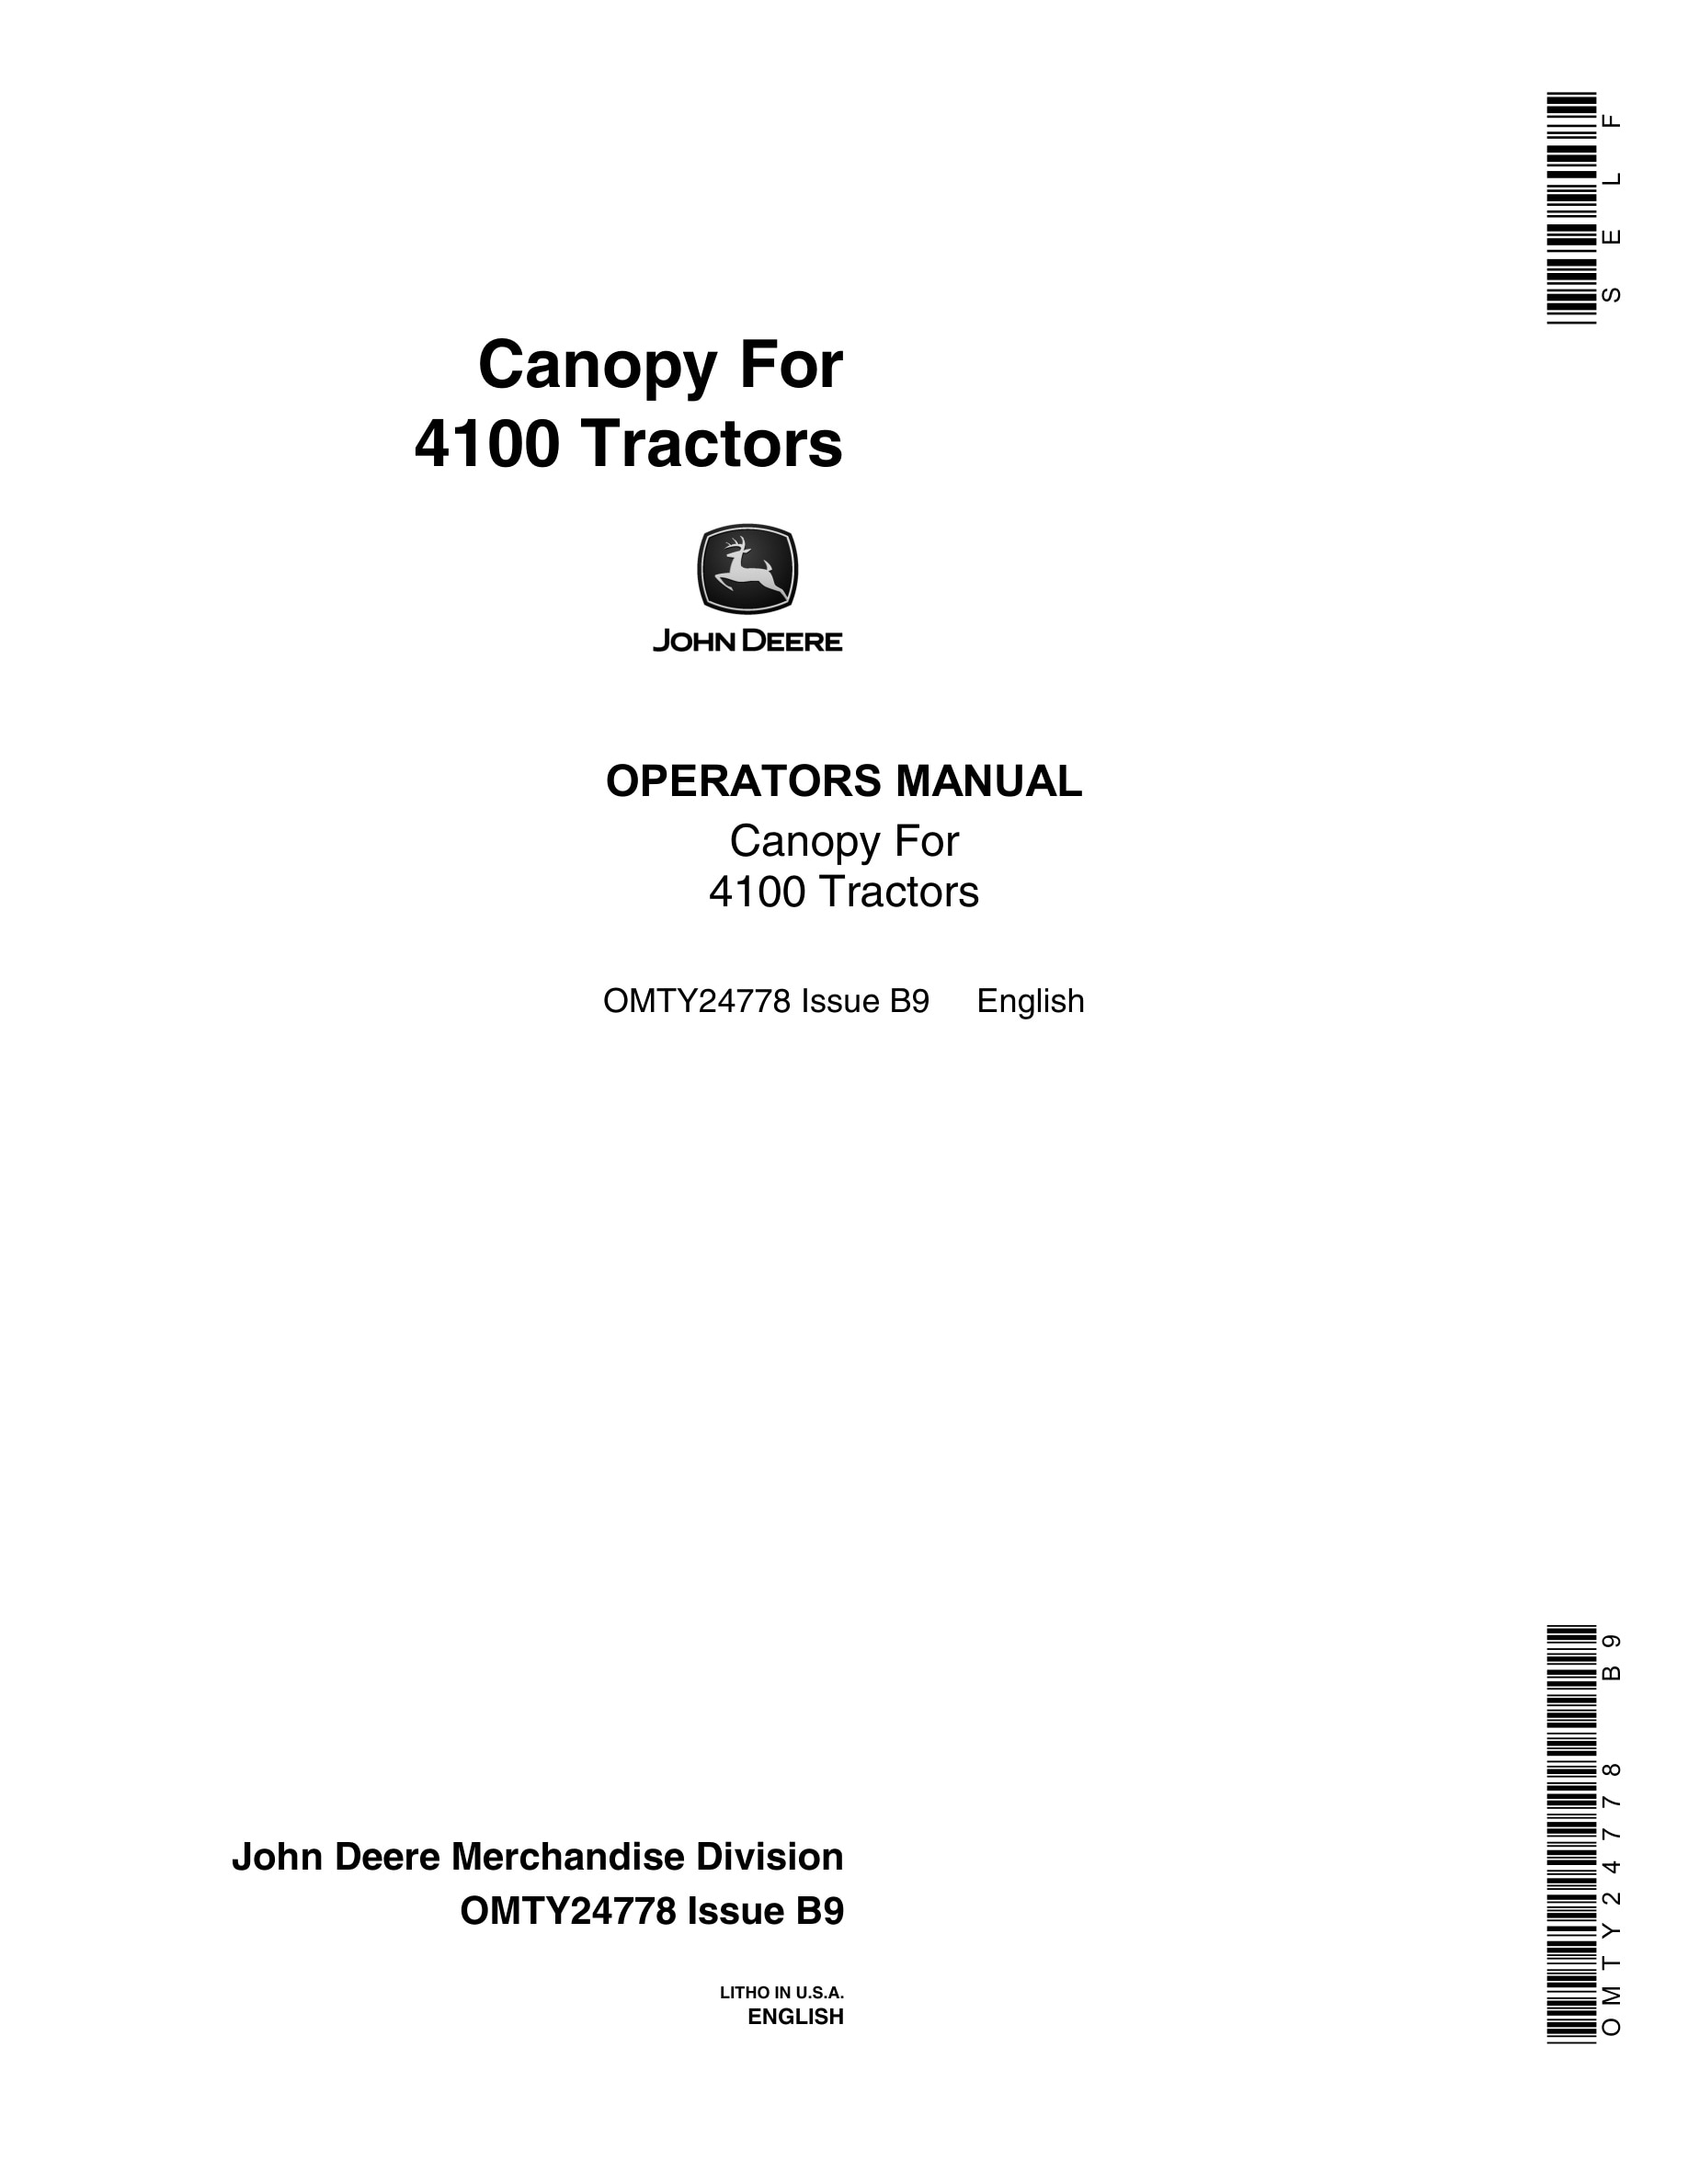 John Deere Canopy For 4100 Tractors Operator Manuals OMTY24778-1